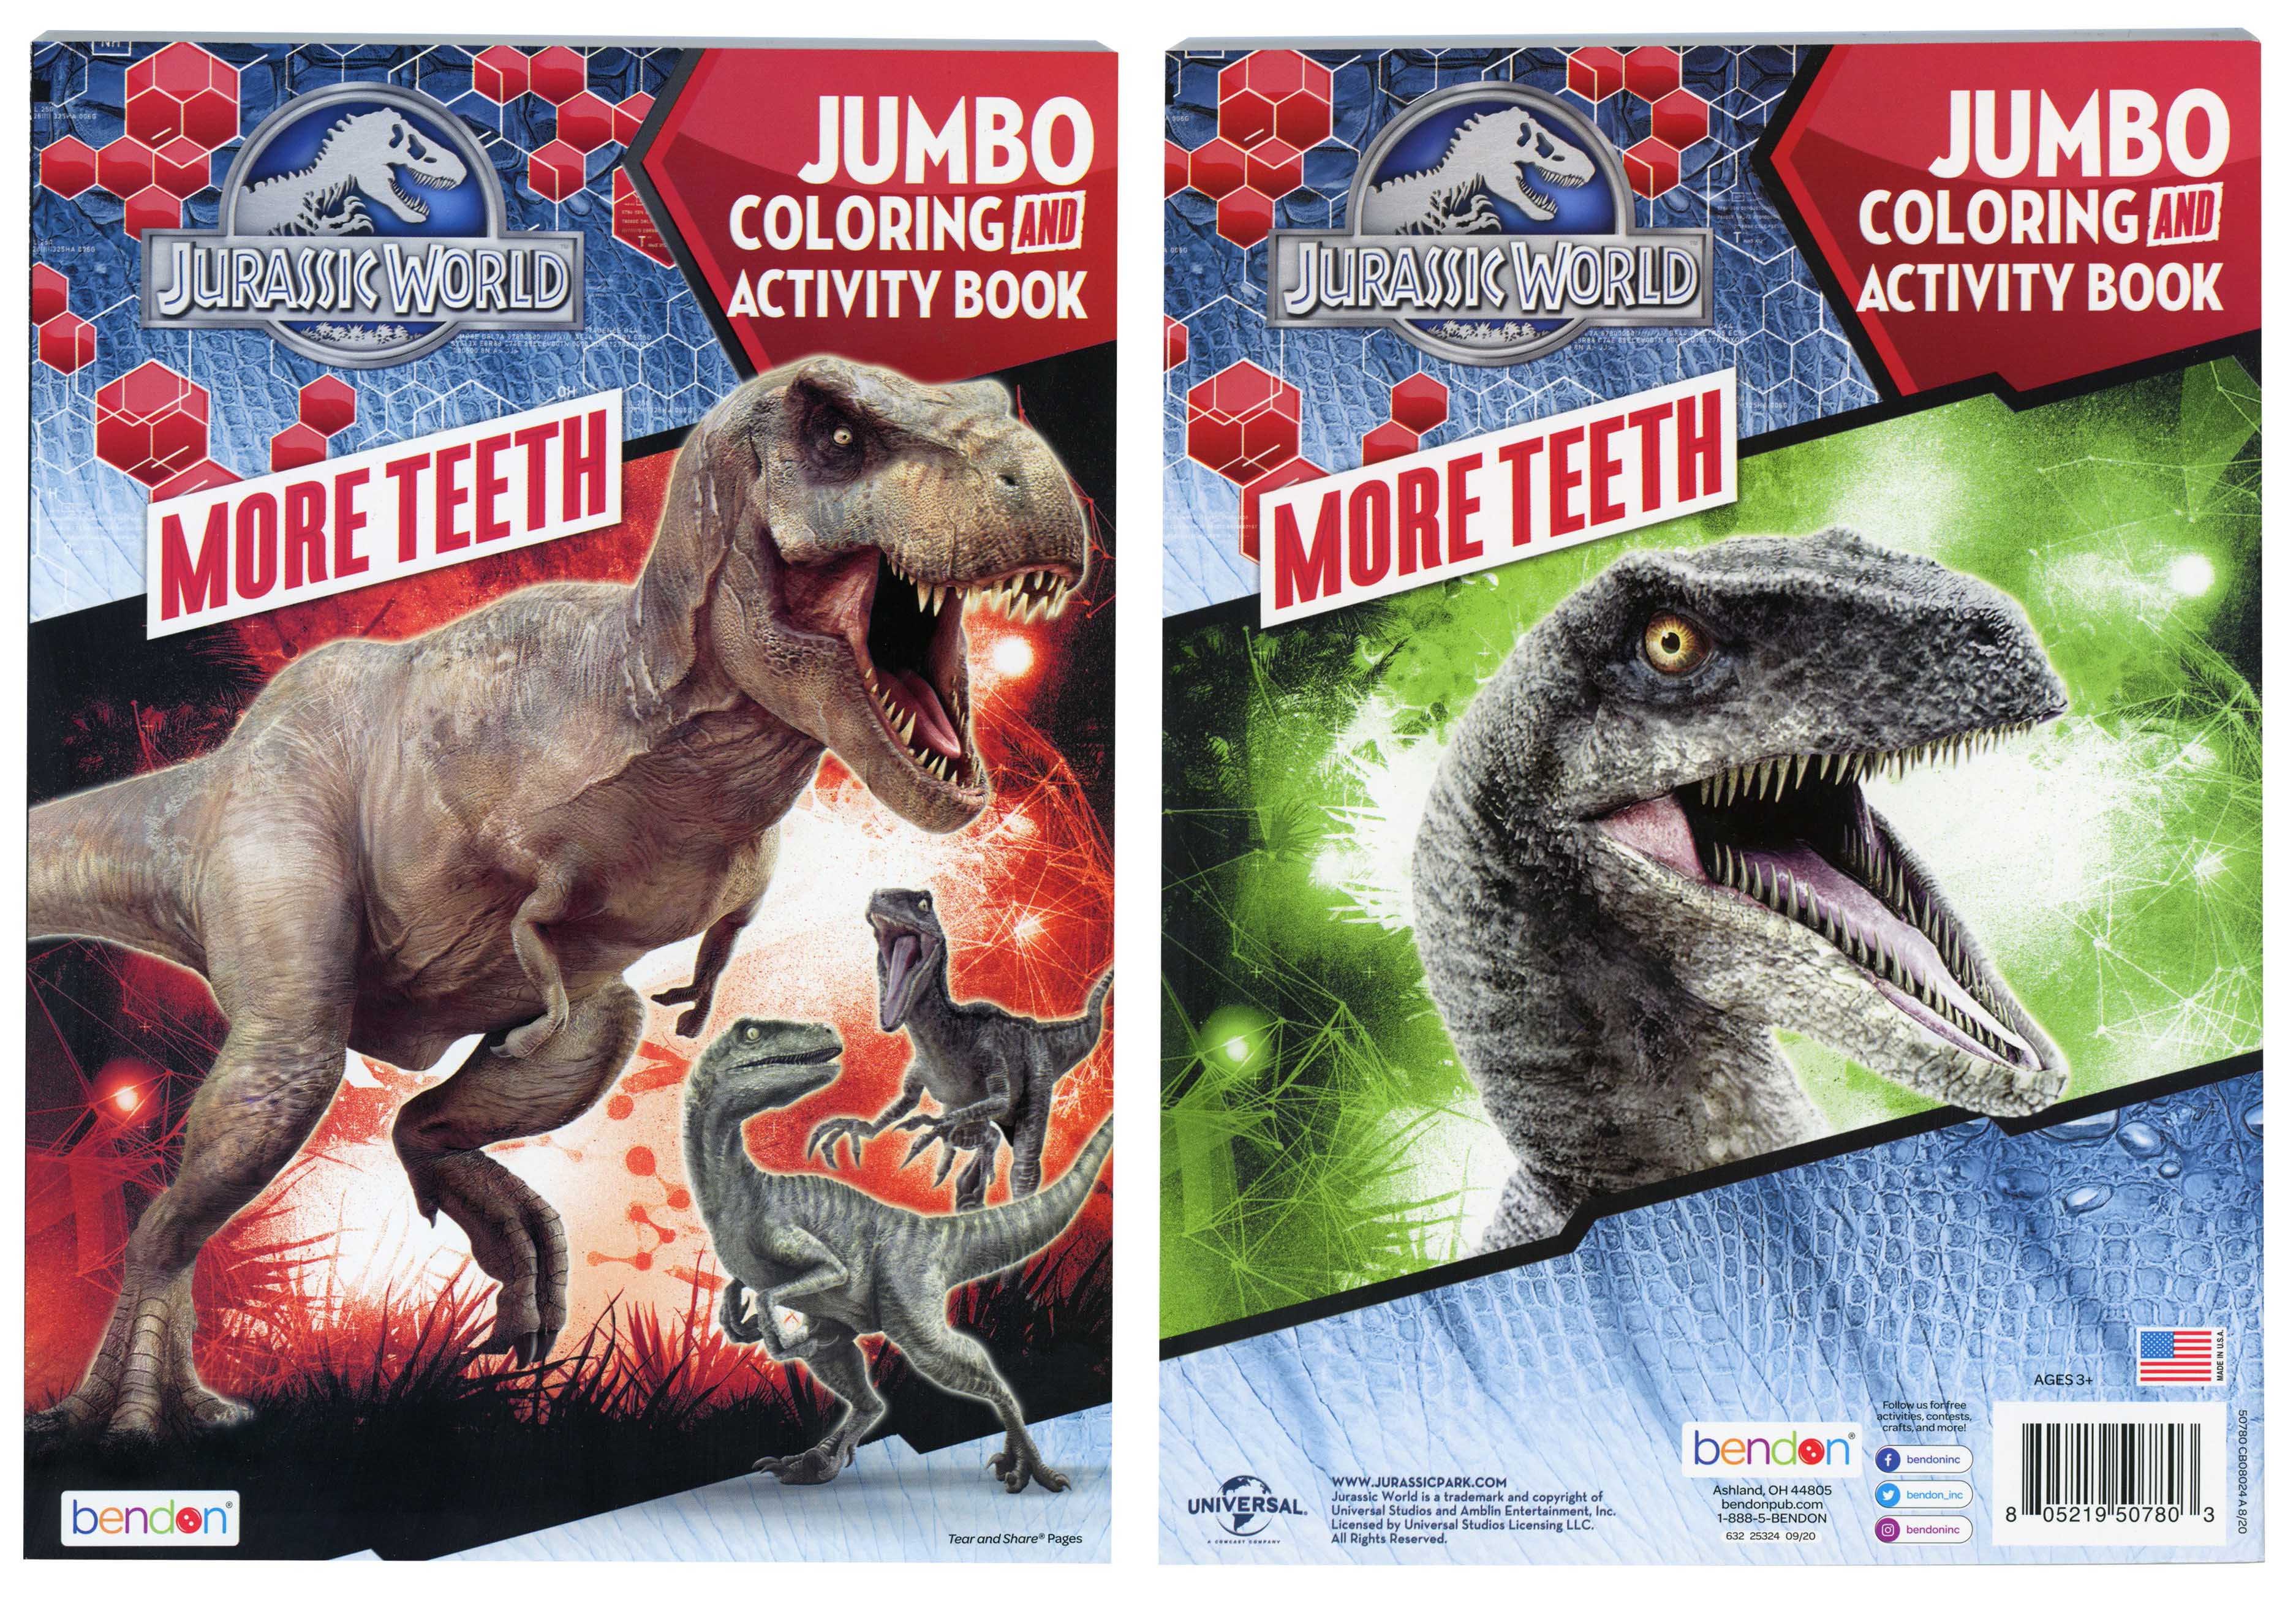 Jurassic World Coloring Book 50780 | CR Toys